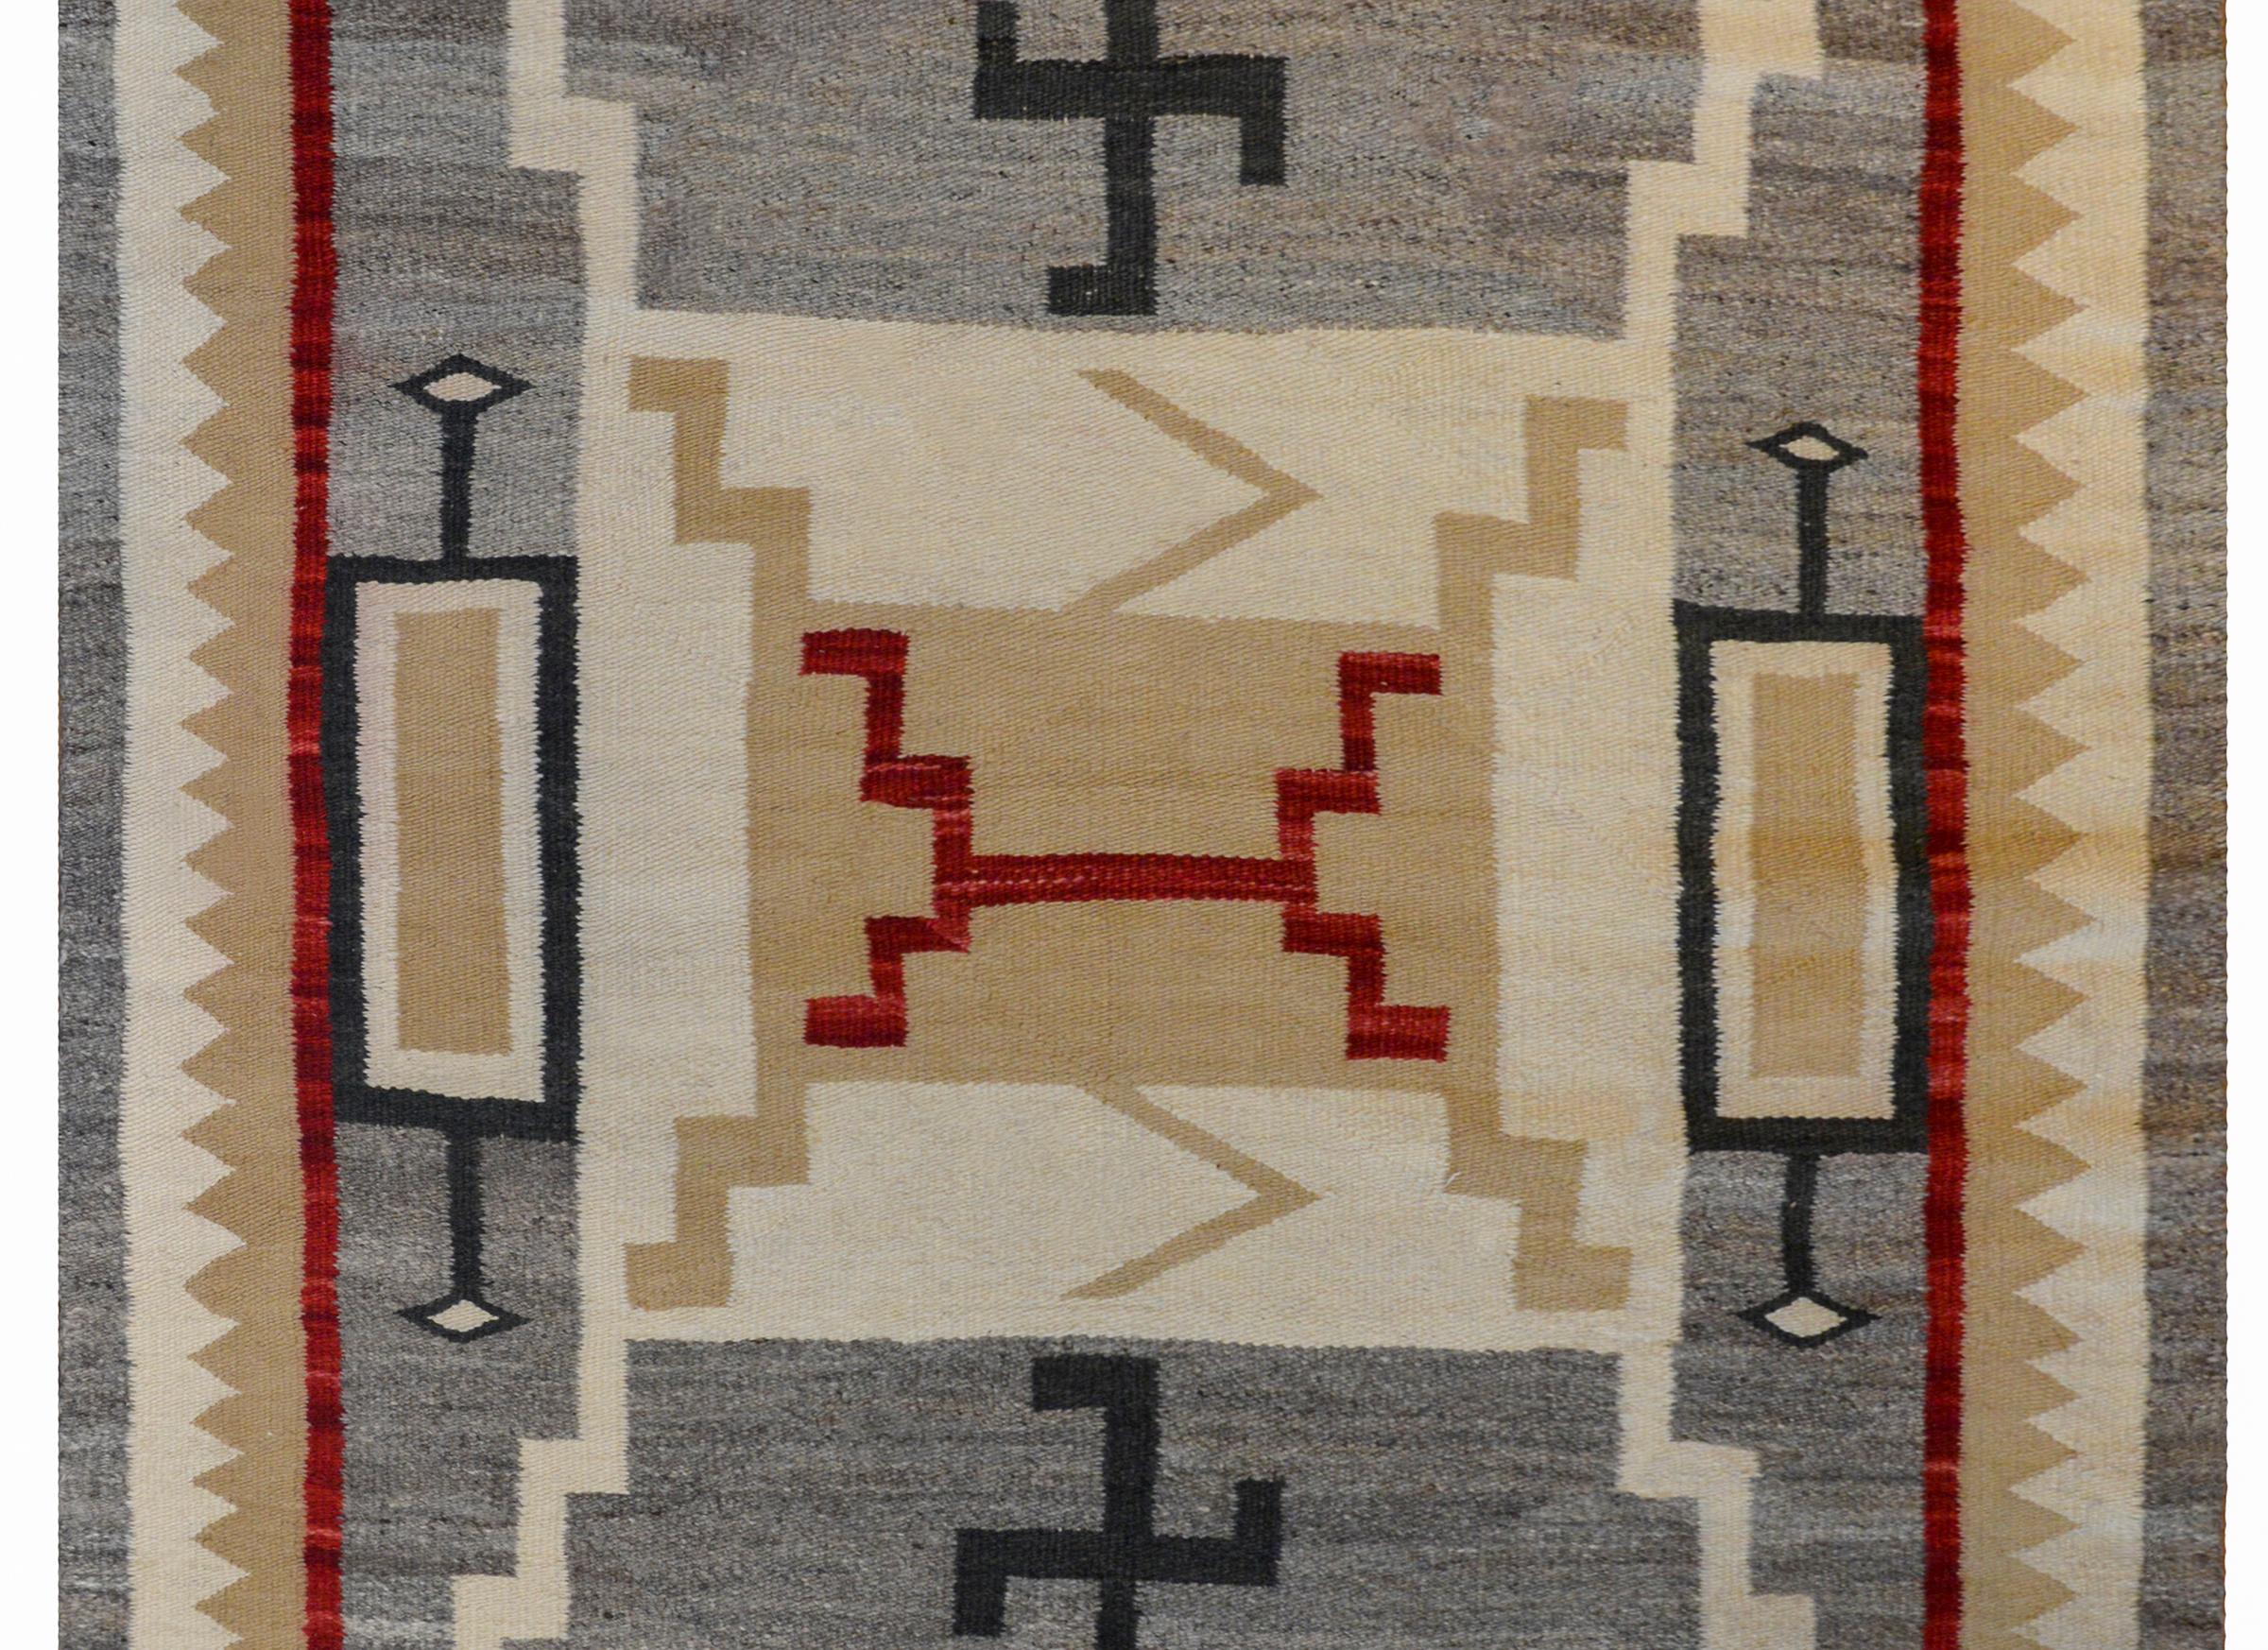 A fantastic early 20th century Navajo rug with a busy pattern containing multiple wide zigzag stripes woven in crimson, tan, and cream colored wool flanked by black swastikas, symbols of good luck, on a gray background surrounded by a wide tan and